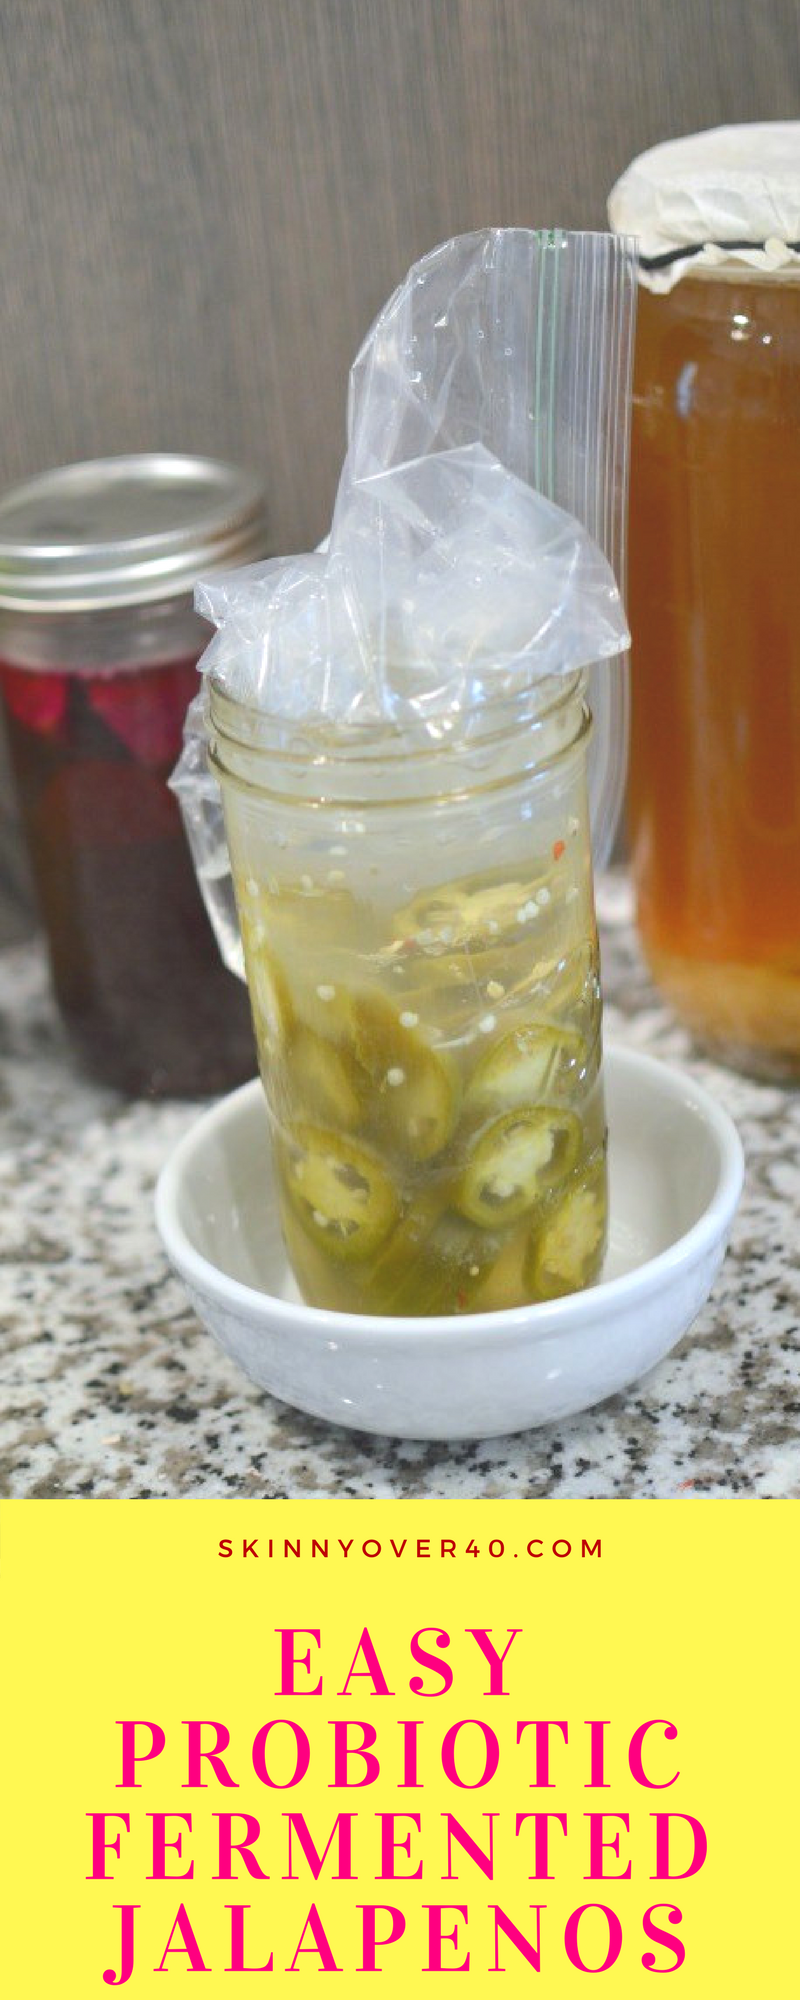 Probiotic Fermented Jalapenos are the perfect snack when made from scratch.They relieve bloating and help with weight loss. 